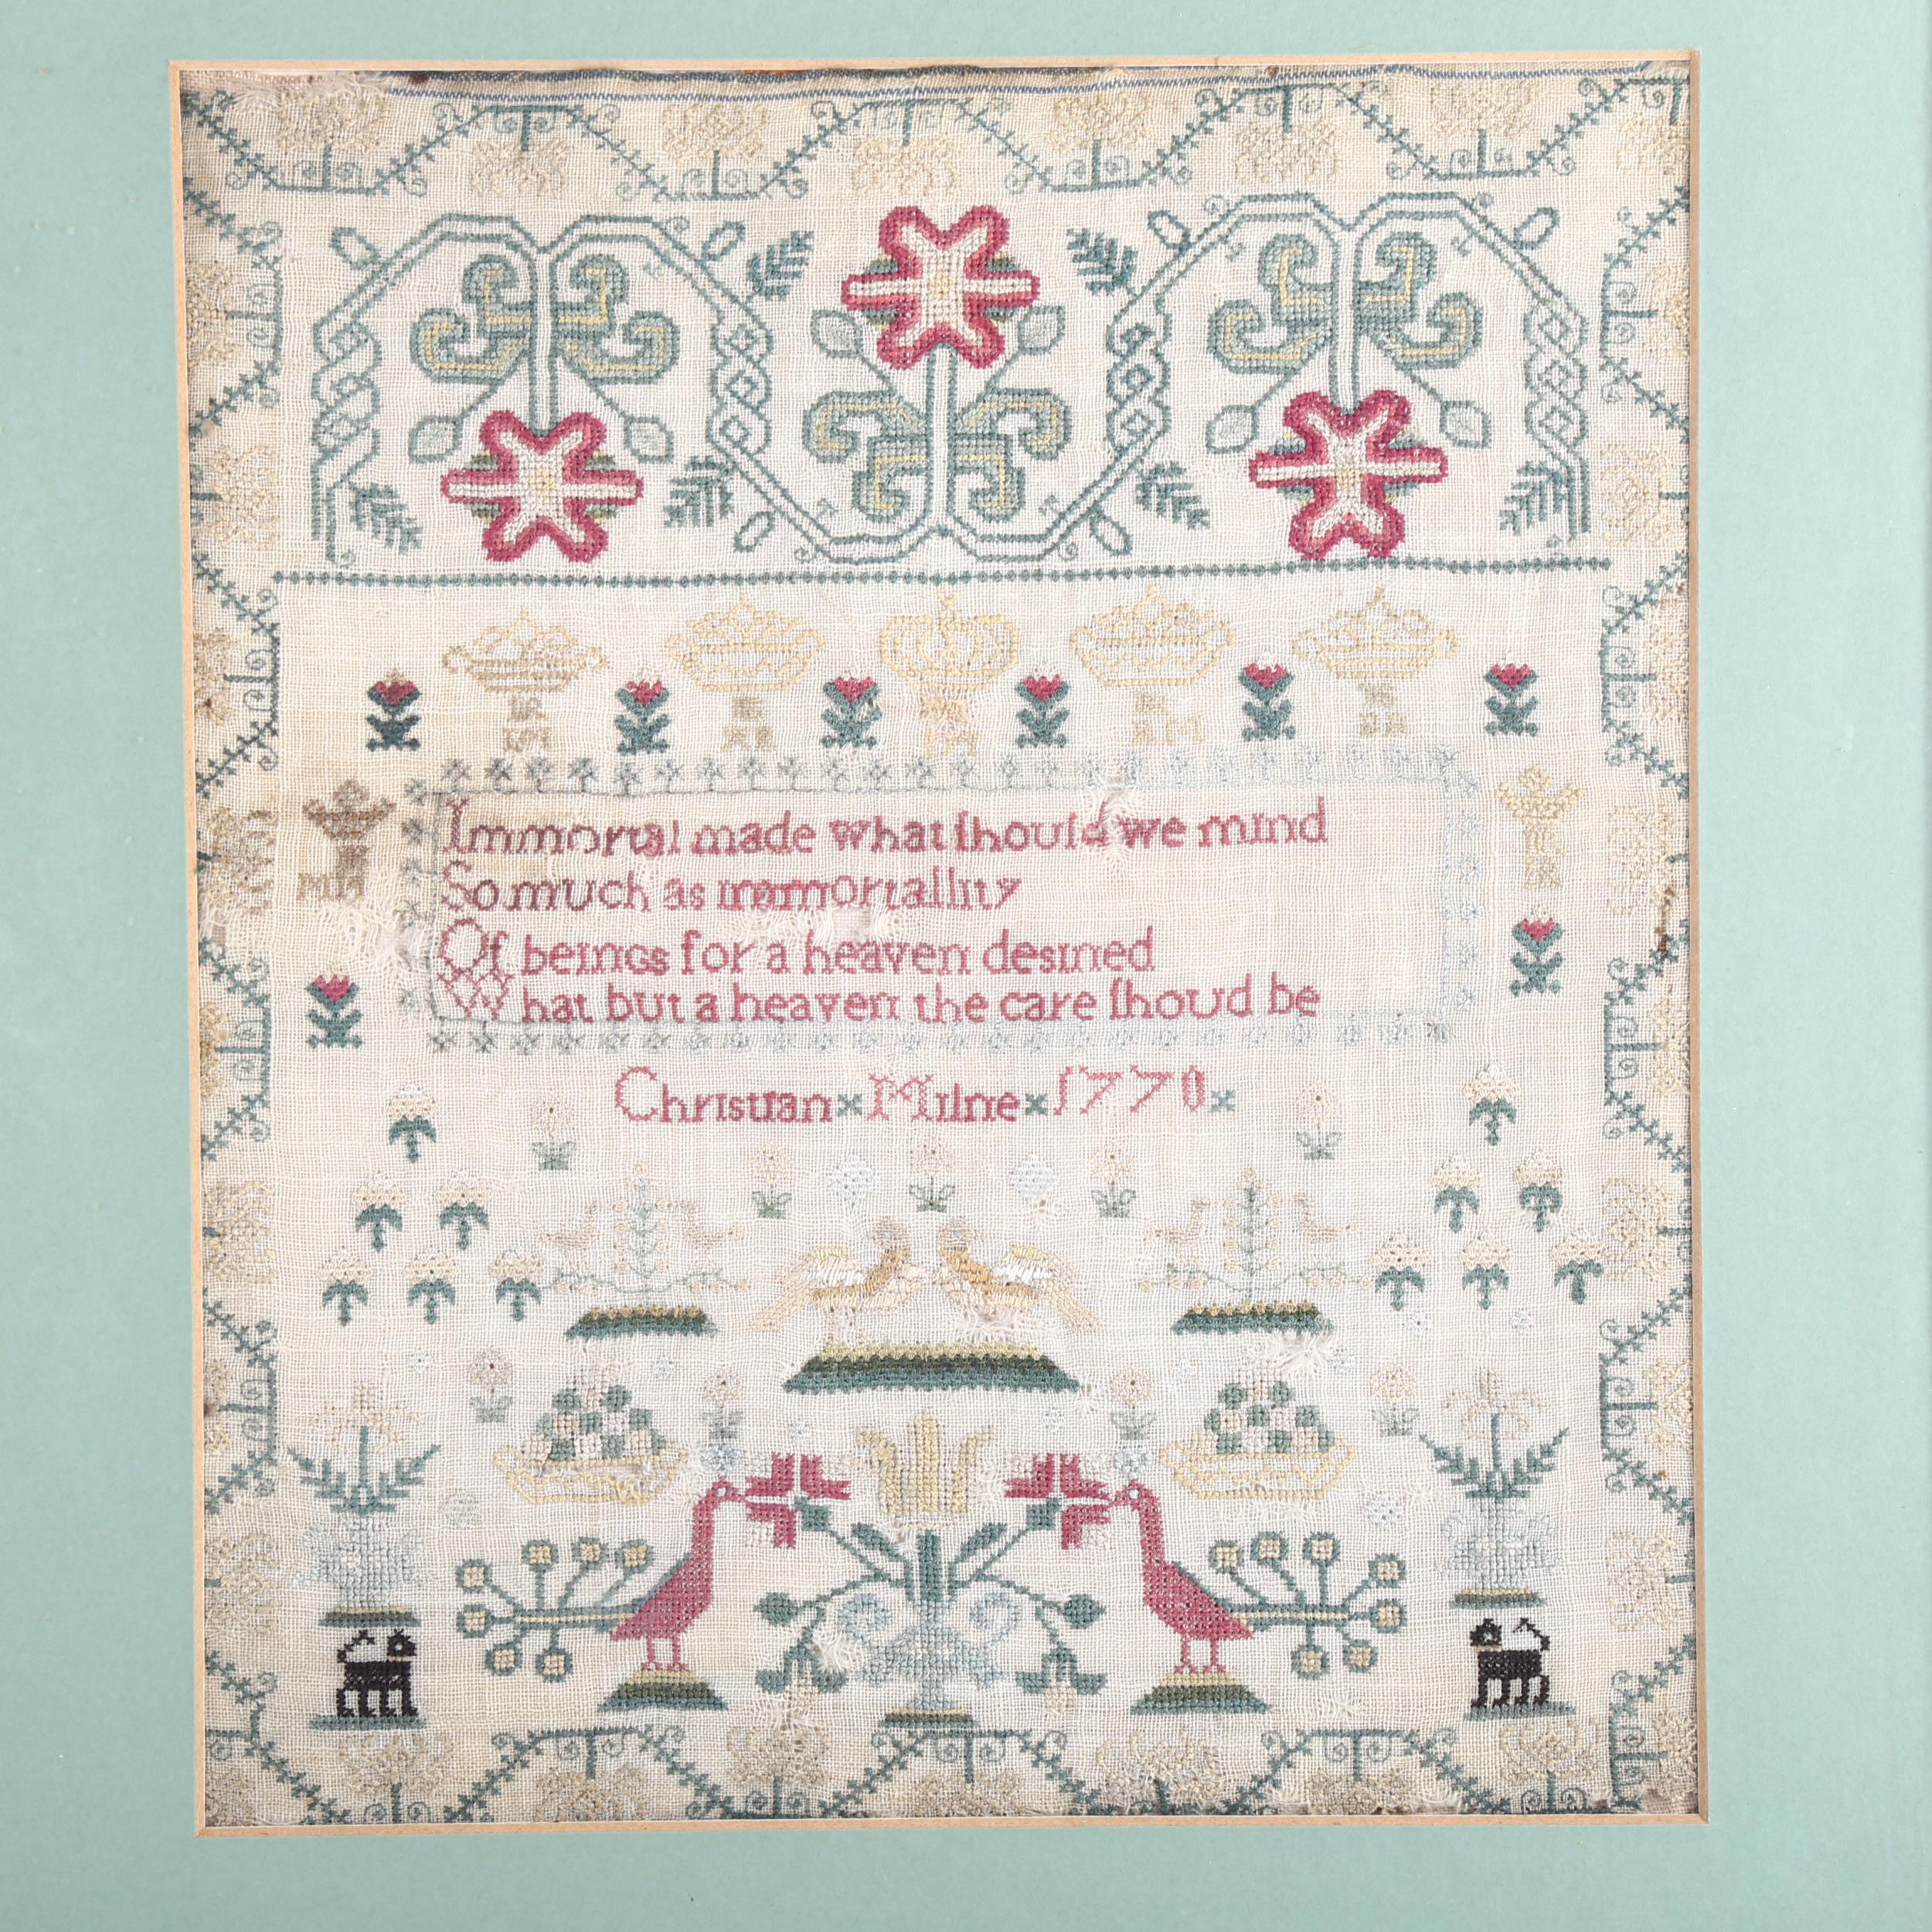 An 18th century needlework sampler, by Christian Milne 1770, 30cm x 26cm Several small holes in